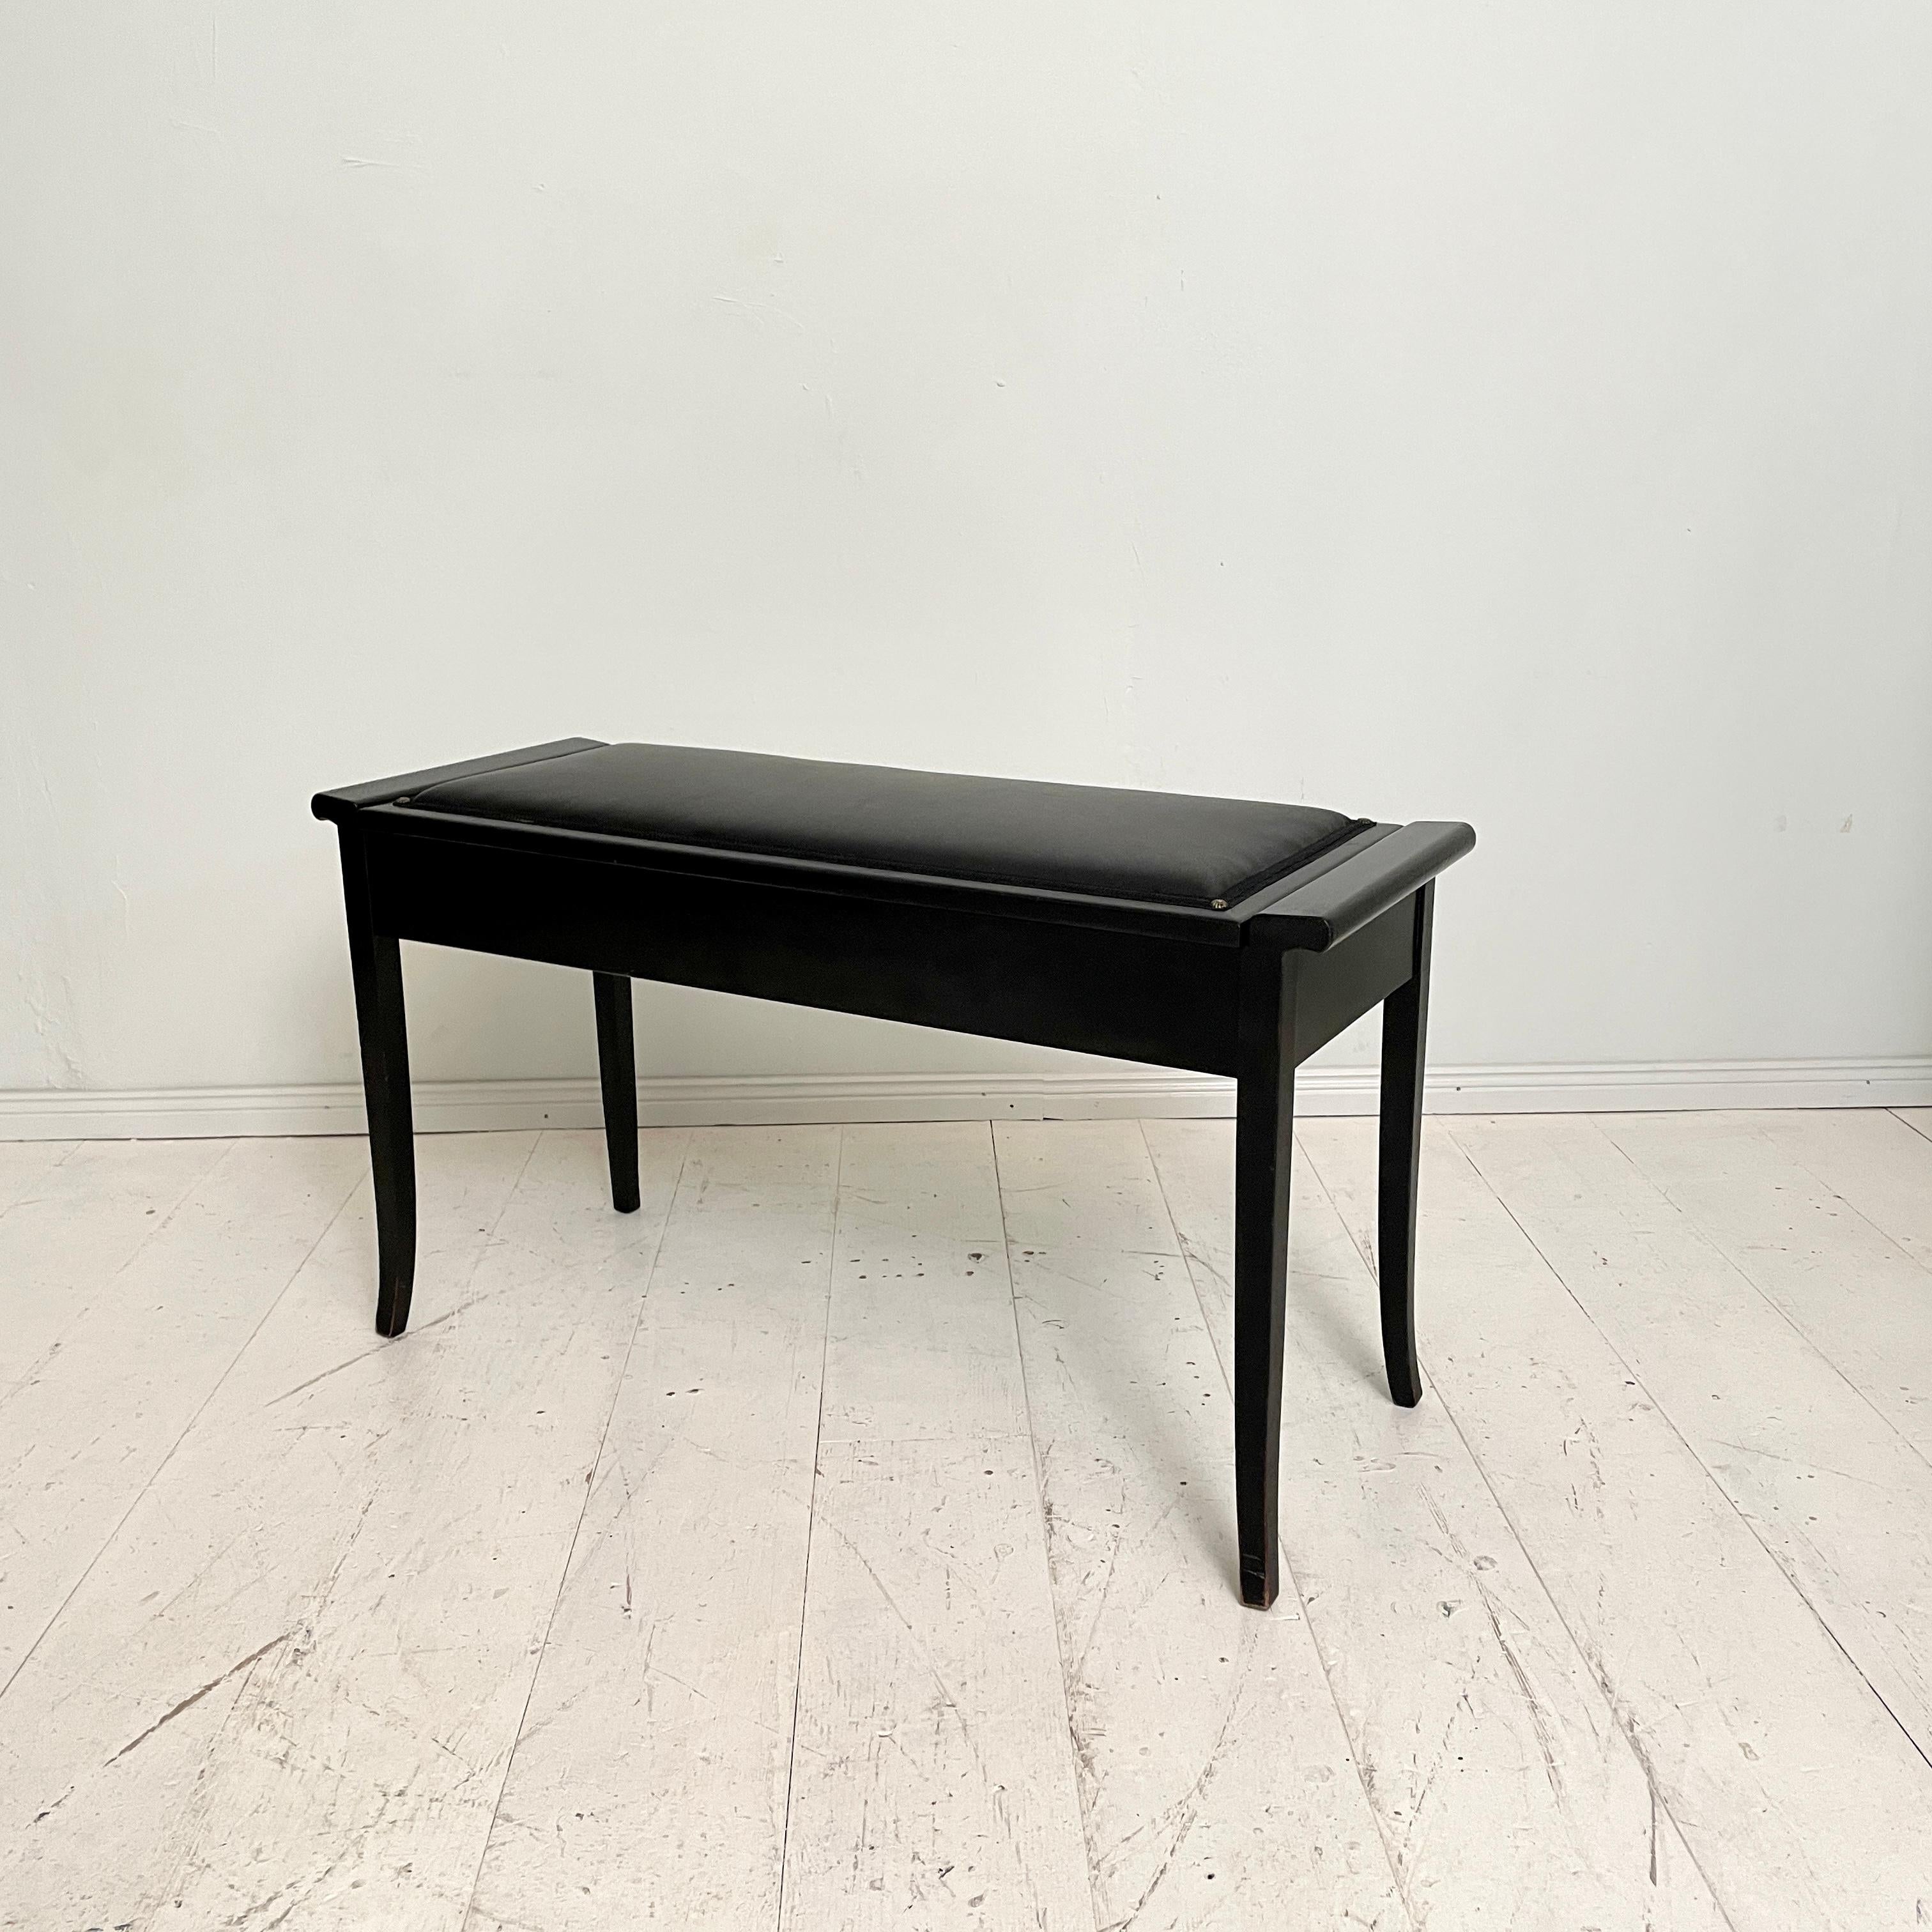 This beautiful Early 20th Century Art Deco Piano bench was made around 1925.
It is made out of Ebonized hardwood and the black leather seat was re-upholstered recently.
The seat of the bench can be opened and there is storage space for sheet